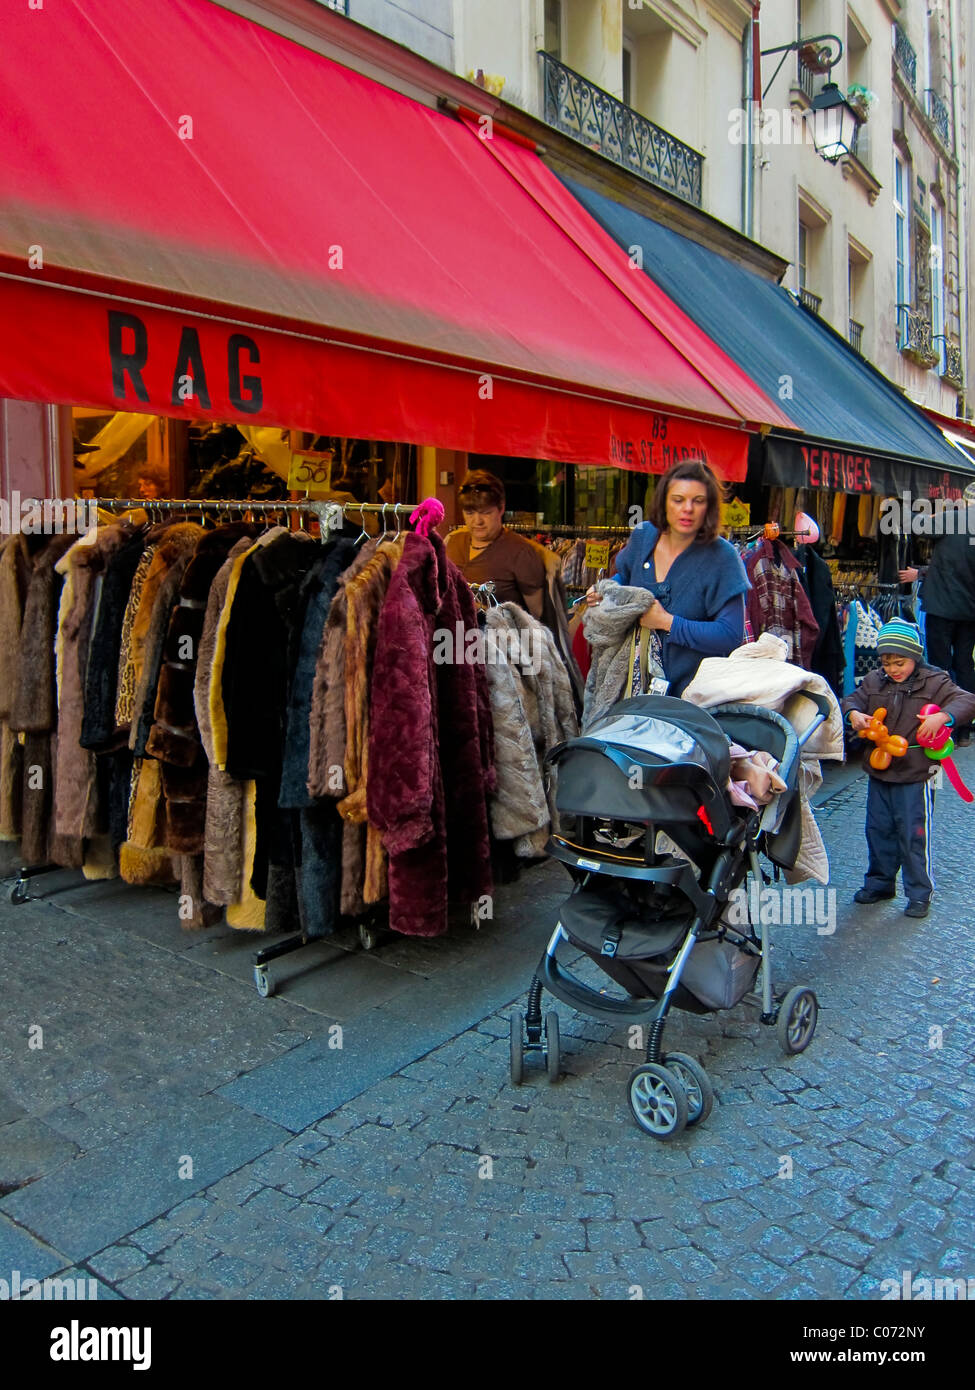 Paris, France, Family Shopping, French Vintage Clothing Store, Display 'Rag', Les Halles District, Shop Front, thrift shop clothing Stock Photo